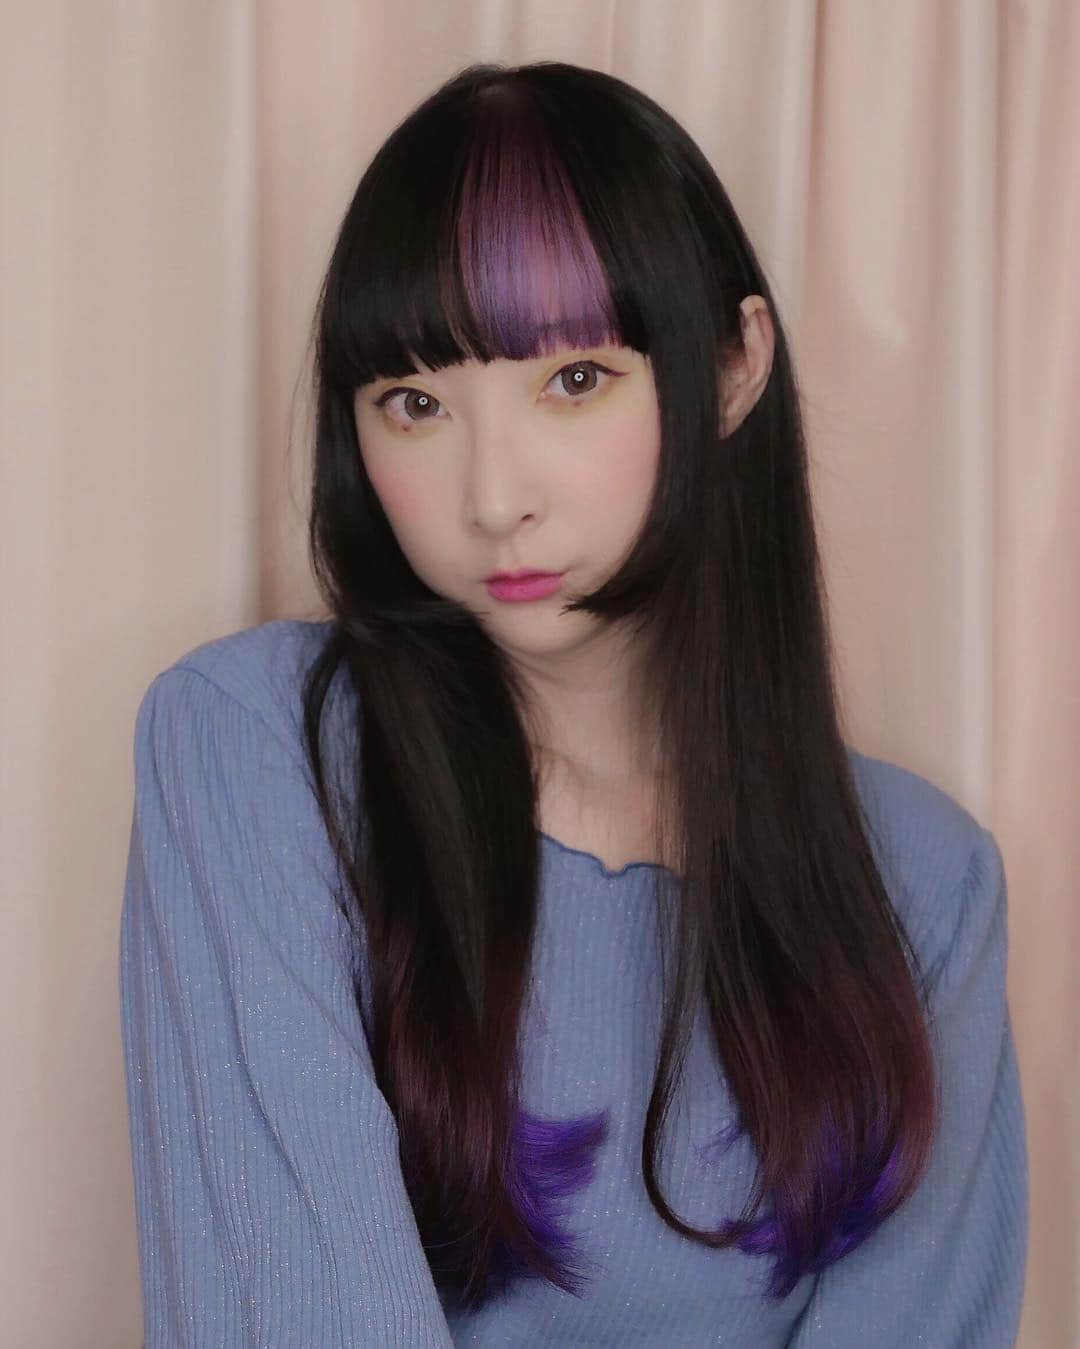 RinRinさんのインスタグラム写真 - (RinRinInstagram)「ニューヘア💇🏻‍♀️ @number76_gomi @hair_salon_nalu いつもありがとう〜😘💕 今回7cmぐらいも切って、なんか軽くなってる気持ち✨ @number76_gomi もパステルハートも作ってくれた😂😂 そして新しい超音波トリートメントも試して見た♪ リンクの「ウル弾」トリートメントです⭐️保湿と弾力を守ってくれるそうで、サラサラな髪になった♪ 長くキープしてくれる、持ち帰りホームトリートメントもいただいた〜♪ 帰り道また @nalustyle.76cafe のチキンを食べてきた〜幸せ〜🤤 @hair_salon_nalu いつもステキなオフ日ありがとう〜😩💕 New hairs 💇🏻‍♀️ by @number76_gomi @hair_salon_nalu 😘💕 feeling light after cutting off about 7cm~ and @number76_gomi made a little pastel heart from them 😂😂❤️ I also tried their new ultrasonic treatment menu, the “URUDAN” where it helps with both moisture retention and repair of your hair strands.  They also give you a home treatment to continue maintaining your beautiful silky hair✨of course I had to stop by @nalustyle.76cafe for dinner 🤤 perfectly cooked chicken with rice 🤤 thank you @hair_salon_nalu for always giving me a lovely pampering day off😘💕 . . *Hair maintenance and food sponsored by @hair_salon_nalu @nalustyle.76cafe . *髪のメンテナンスとディナーは @hair_salon_nalu @nalustyle.76cafe より提供されました . . #rinrindoll #rinrinhair #hairsalonnalu #number76 #nalucafe #tokyohairsalon #japanhairsalon #omotesandohairsalon #japanesehairsalon #東京ヘアサロン #表参道ヘアサロン #ヘアサロンナルー #ナルーカフェ #パープルヘア #purplehair #ultrasonictreatment #超音波トリートメント」5月3日 19時44分 - rinrindoll